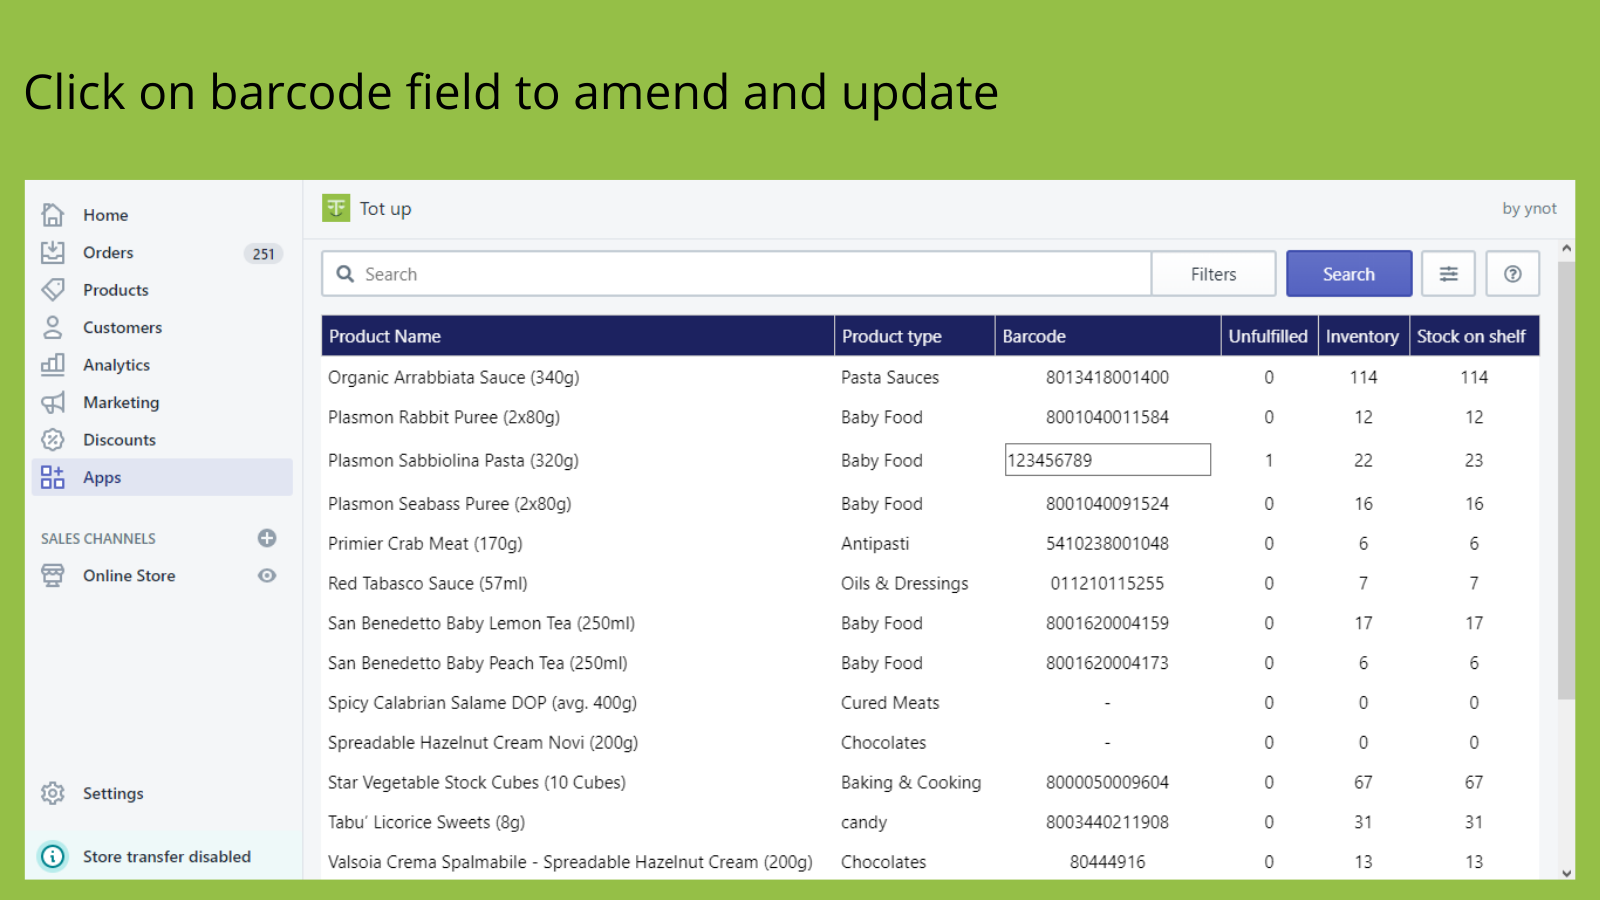 Click on barcode field to amend and update